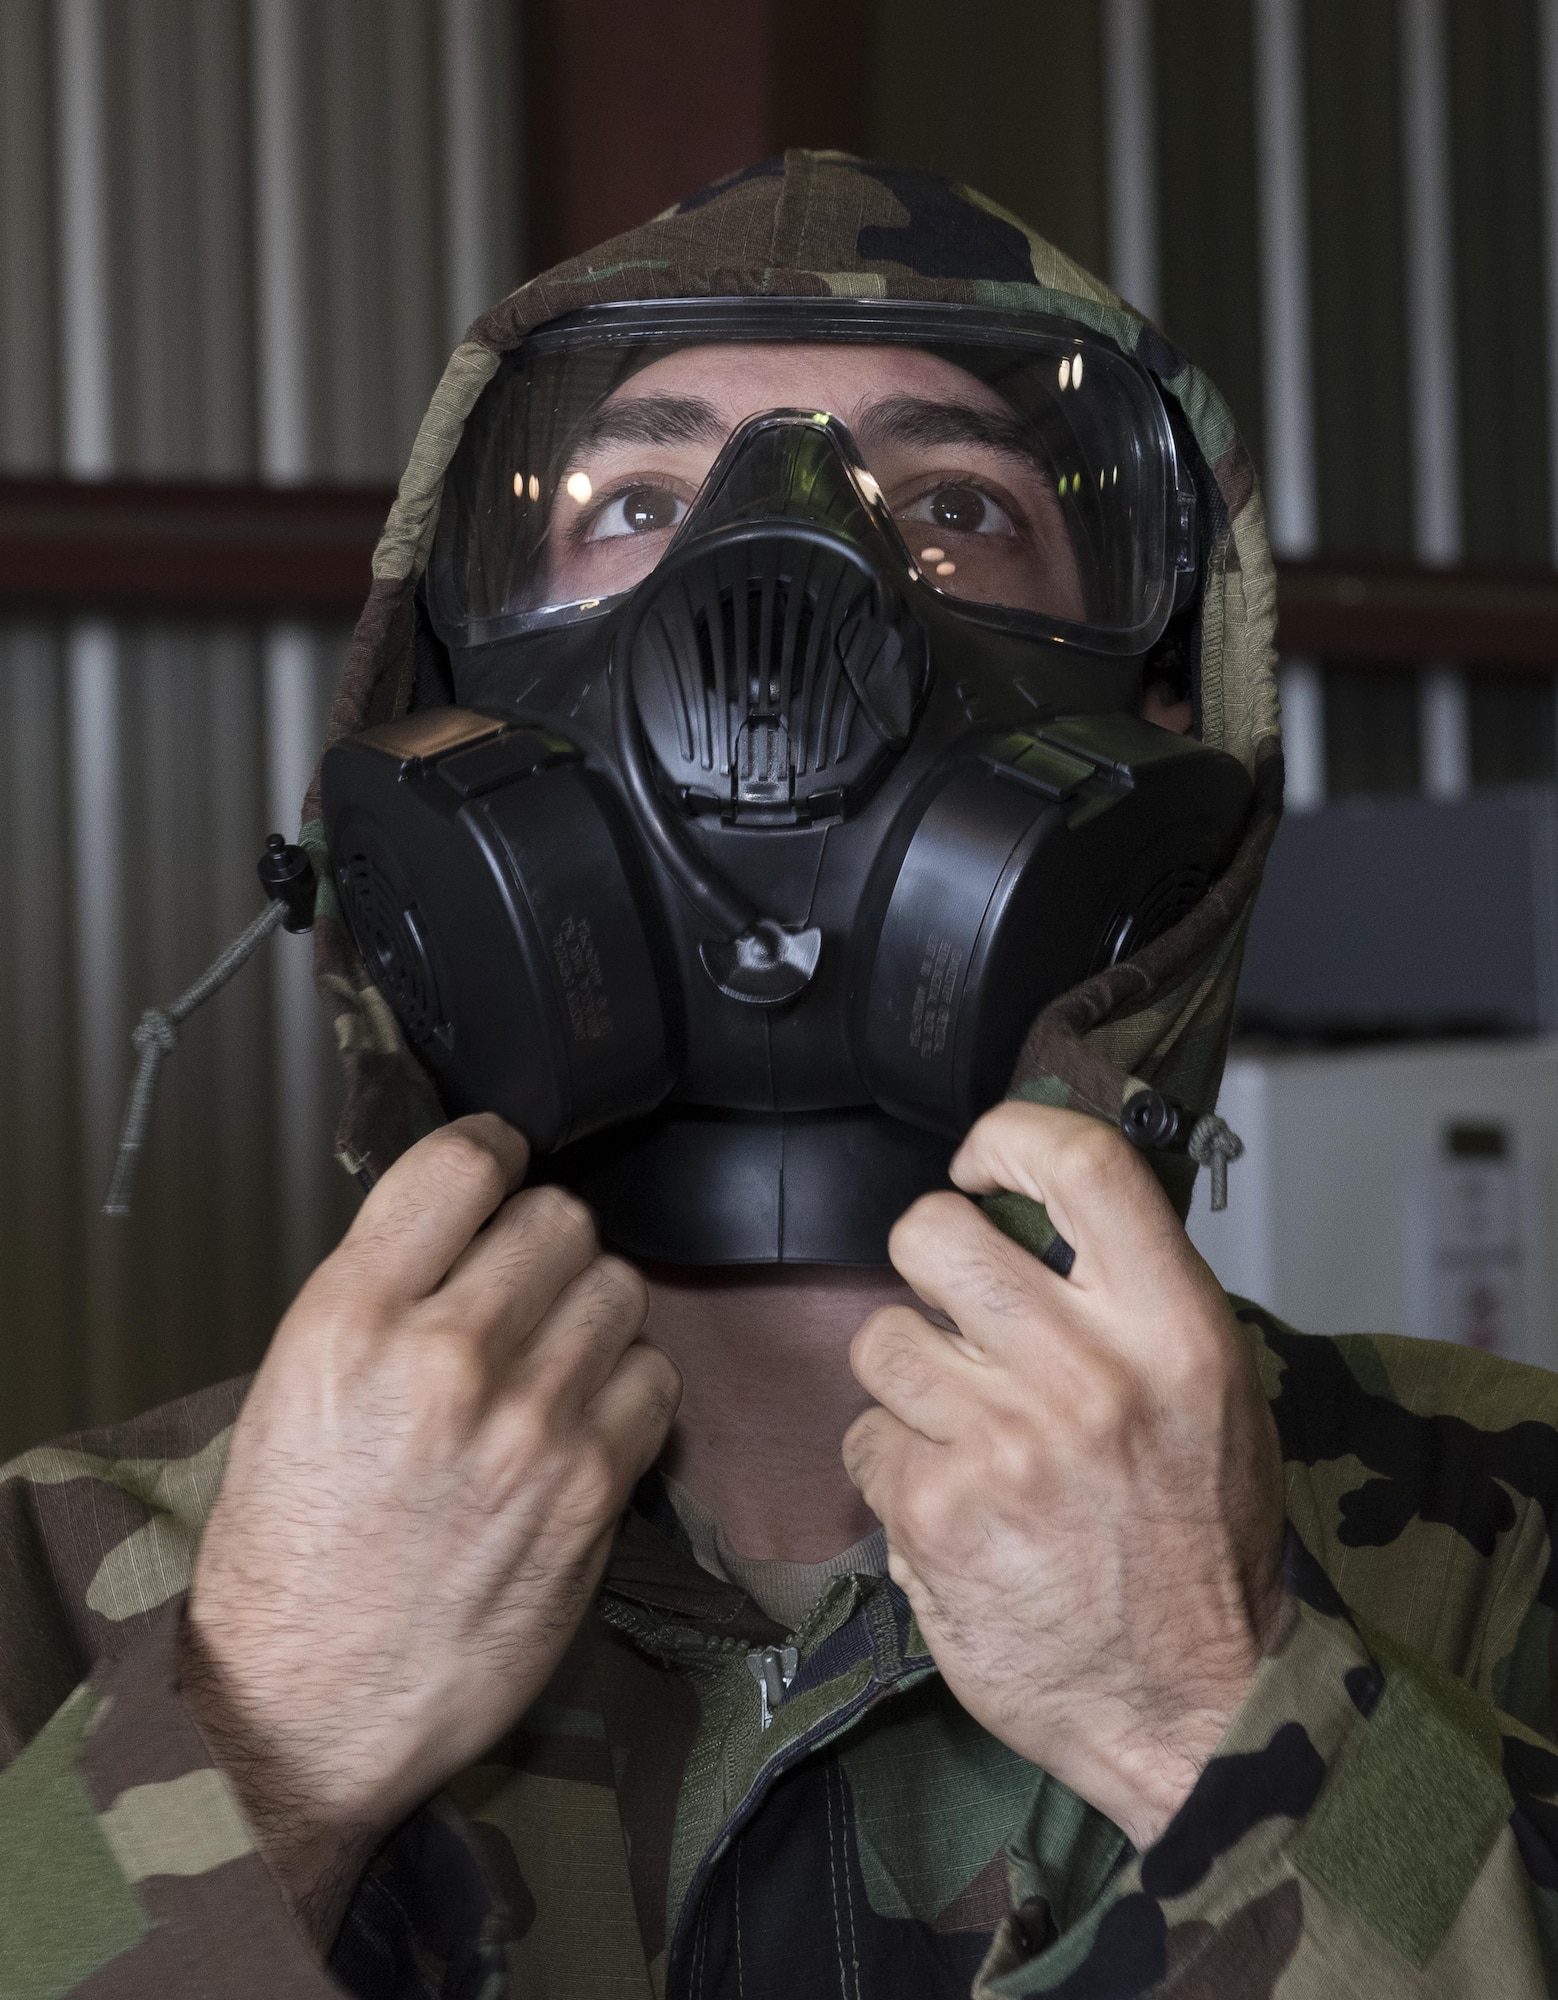 A U.S. Air Force Airman pulls the hood of his mission-oriented protective posture jacket closed over his gas mask to ensure a proper seal during a chemical, biological, radiological and nuclear defense survival skills training course at Travis Air Force Base, Calif., Sep. 21, 2017. Airmen are refreshed on vital skills that may save their lives while on duty by learning proper ways to put on protective equipment in a timely and efficient manner. (U.S. Air Force photo by Heide Couch)